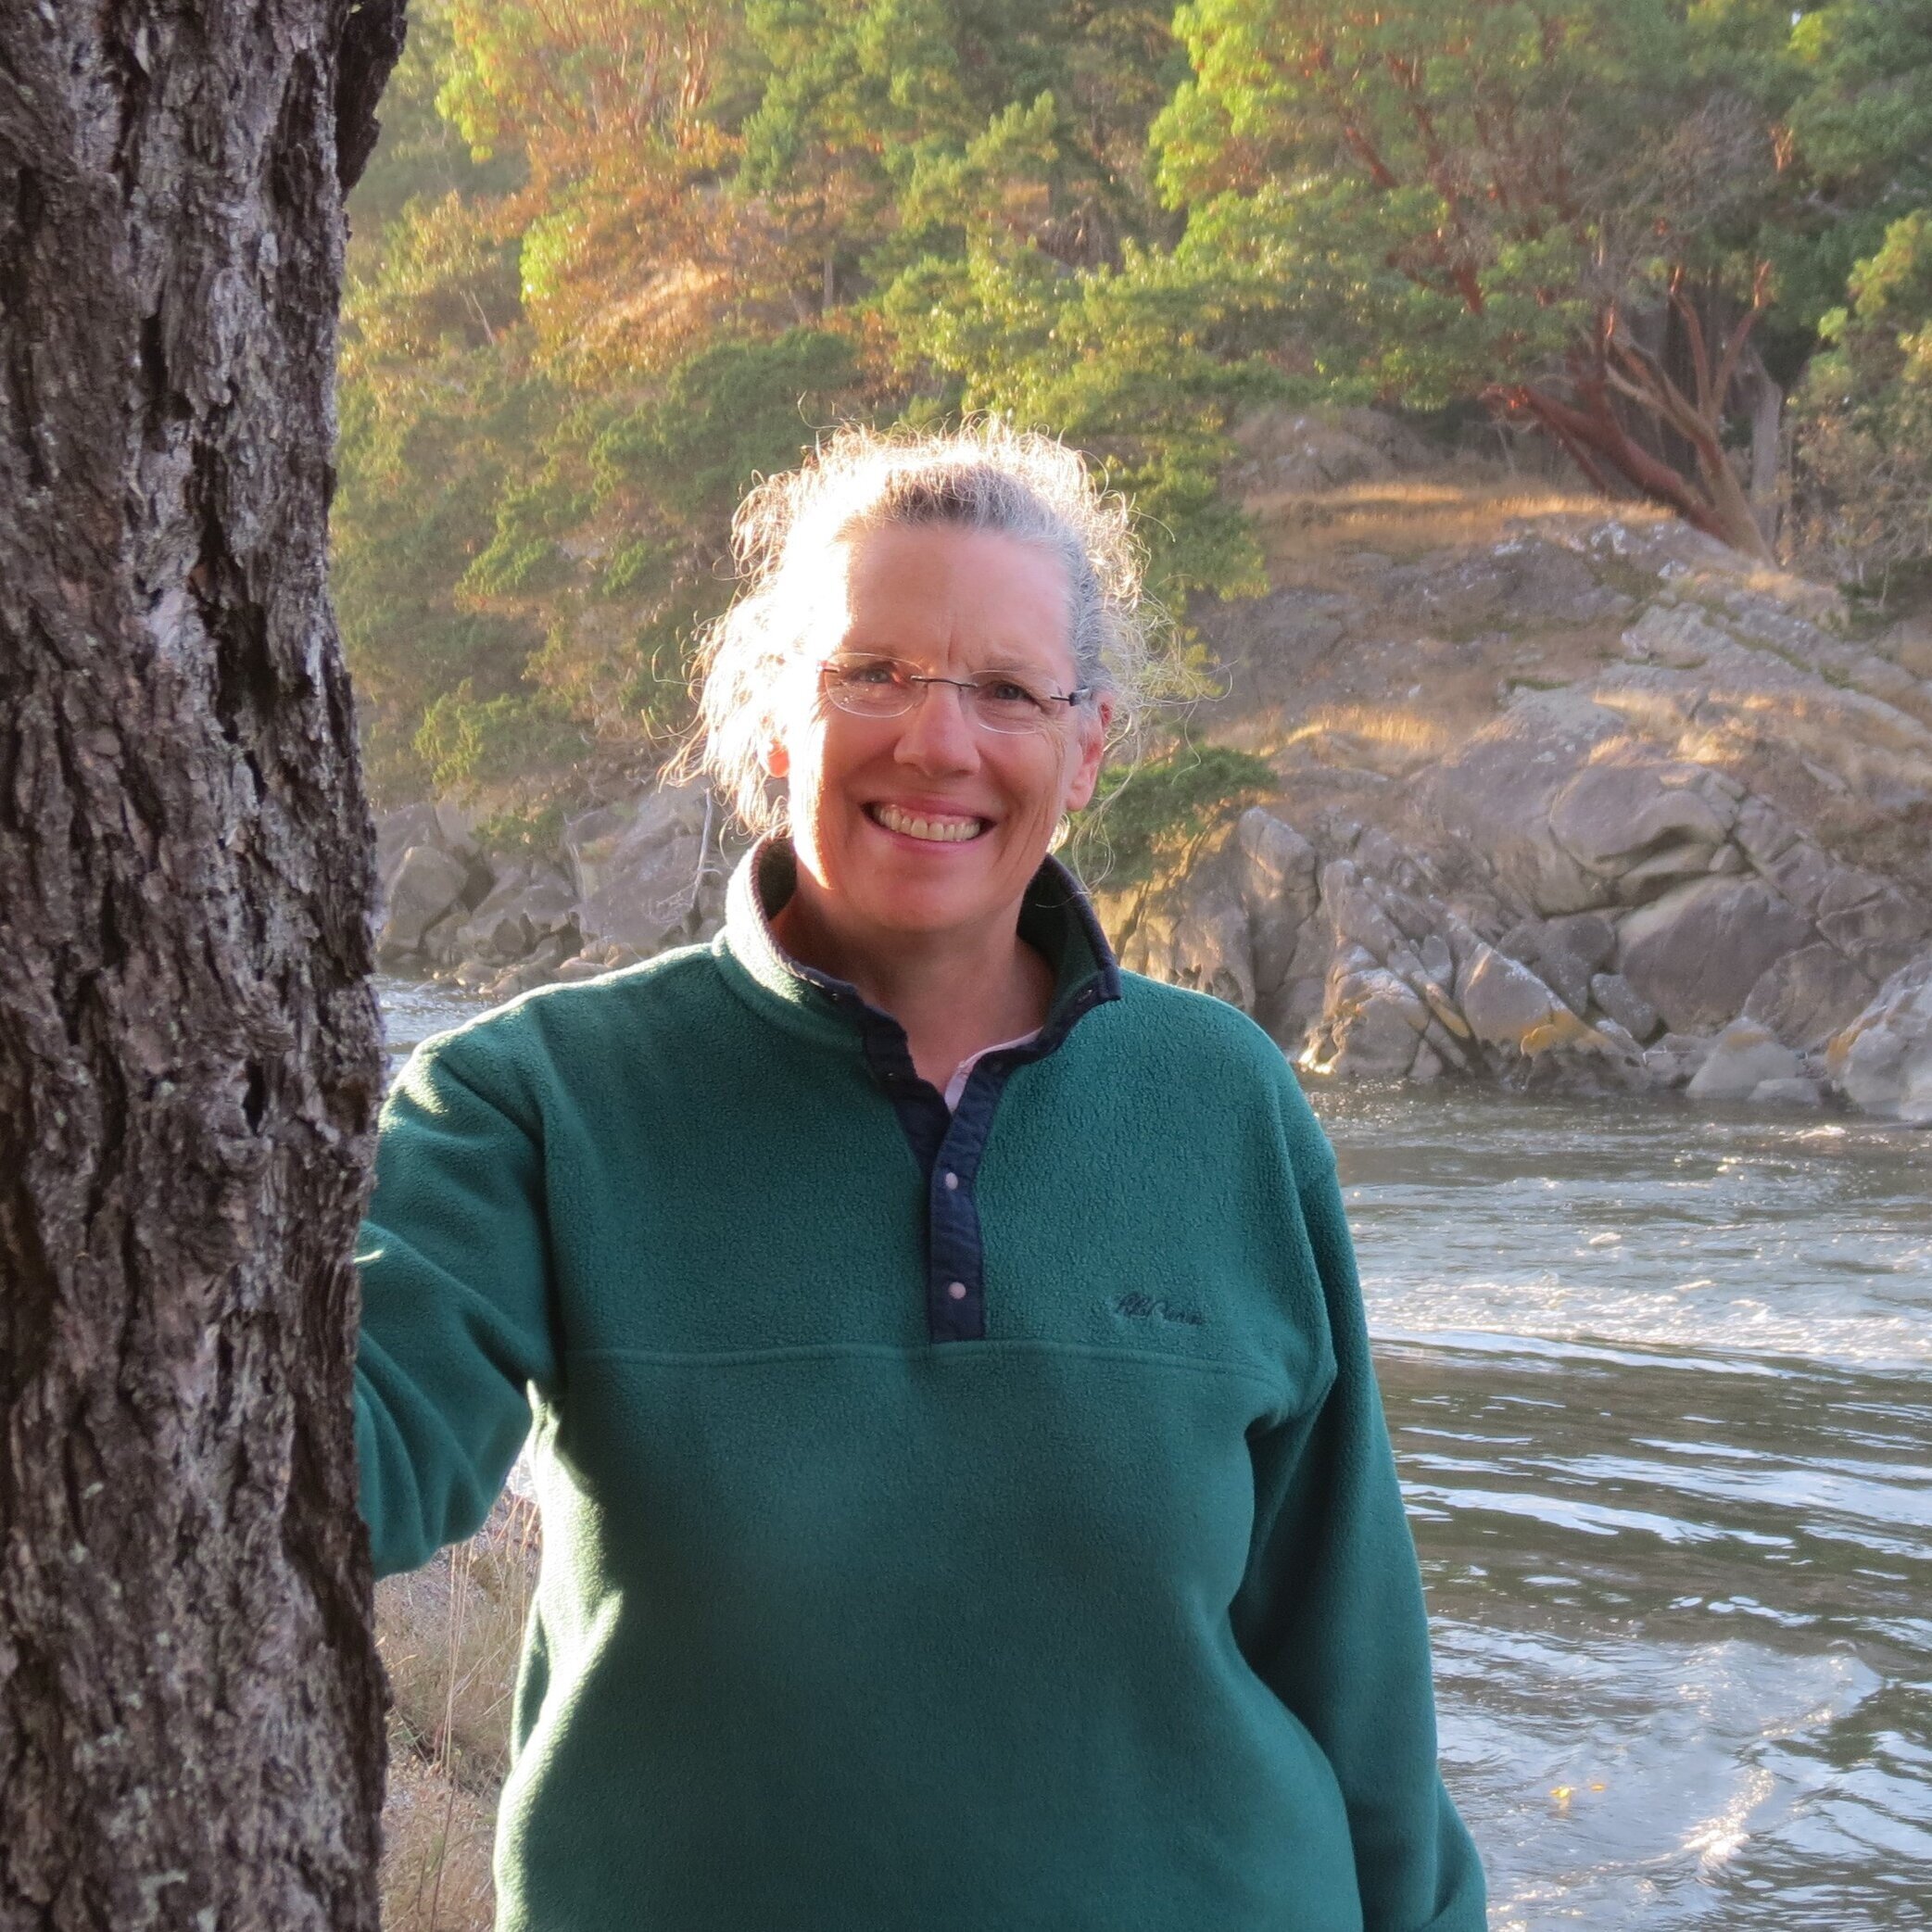 Nancy Engel stands by a tree in front of a river